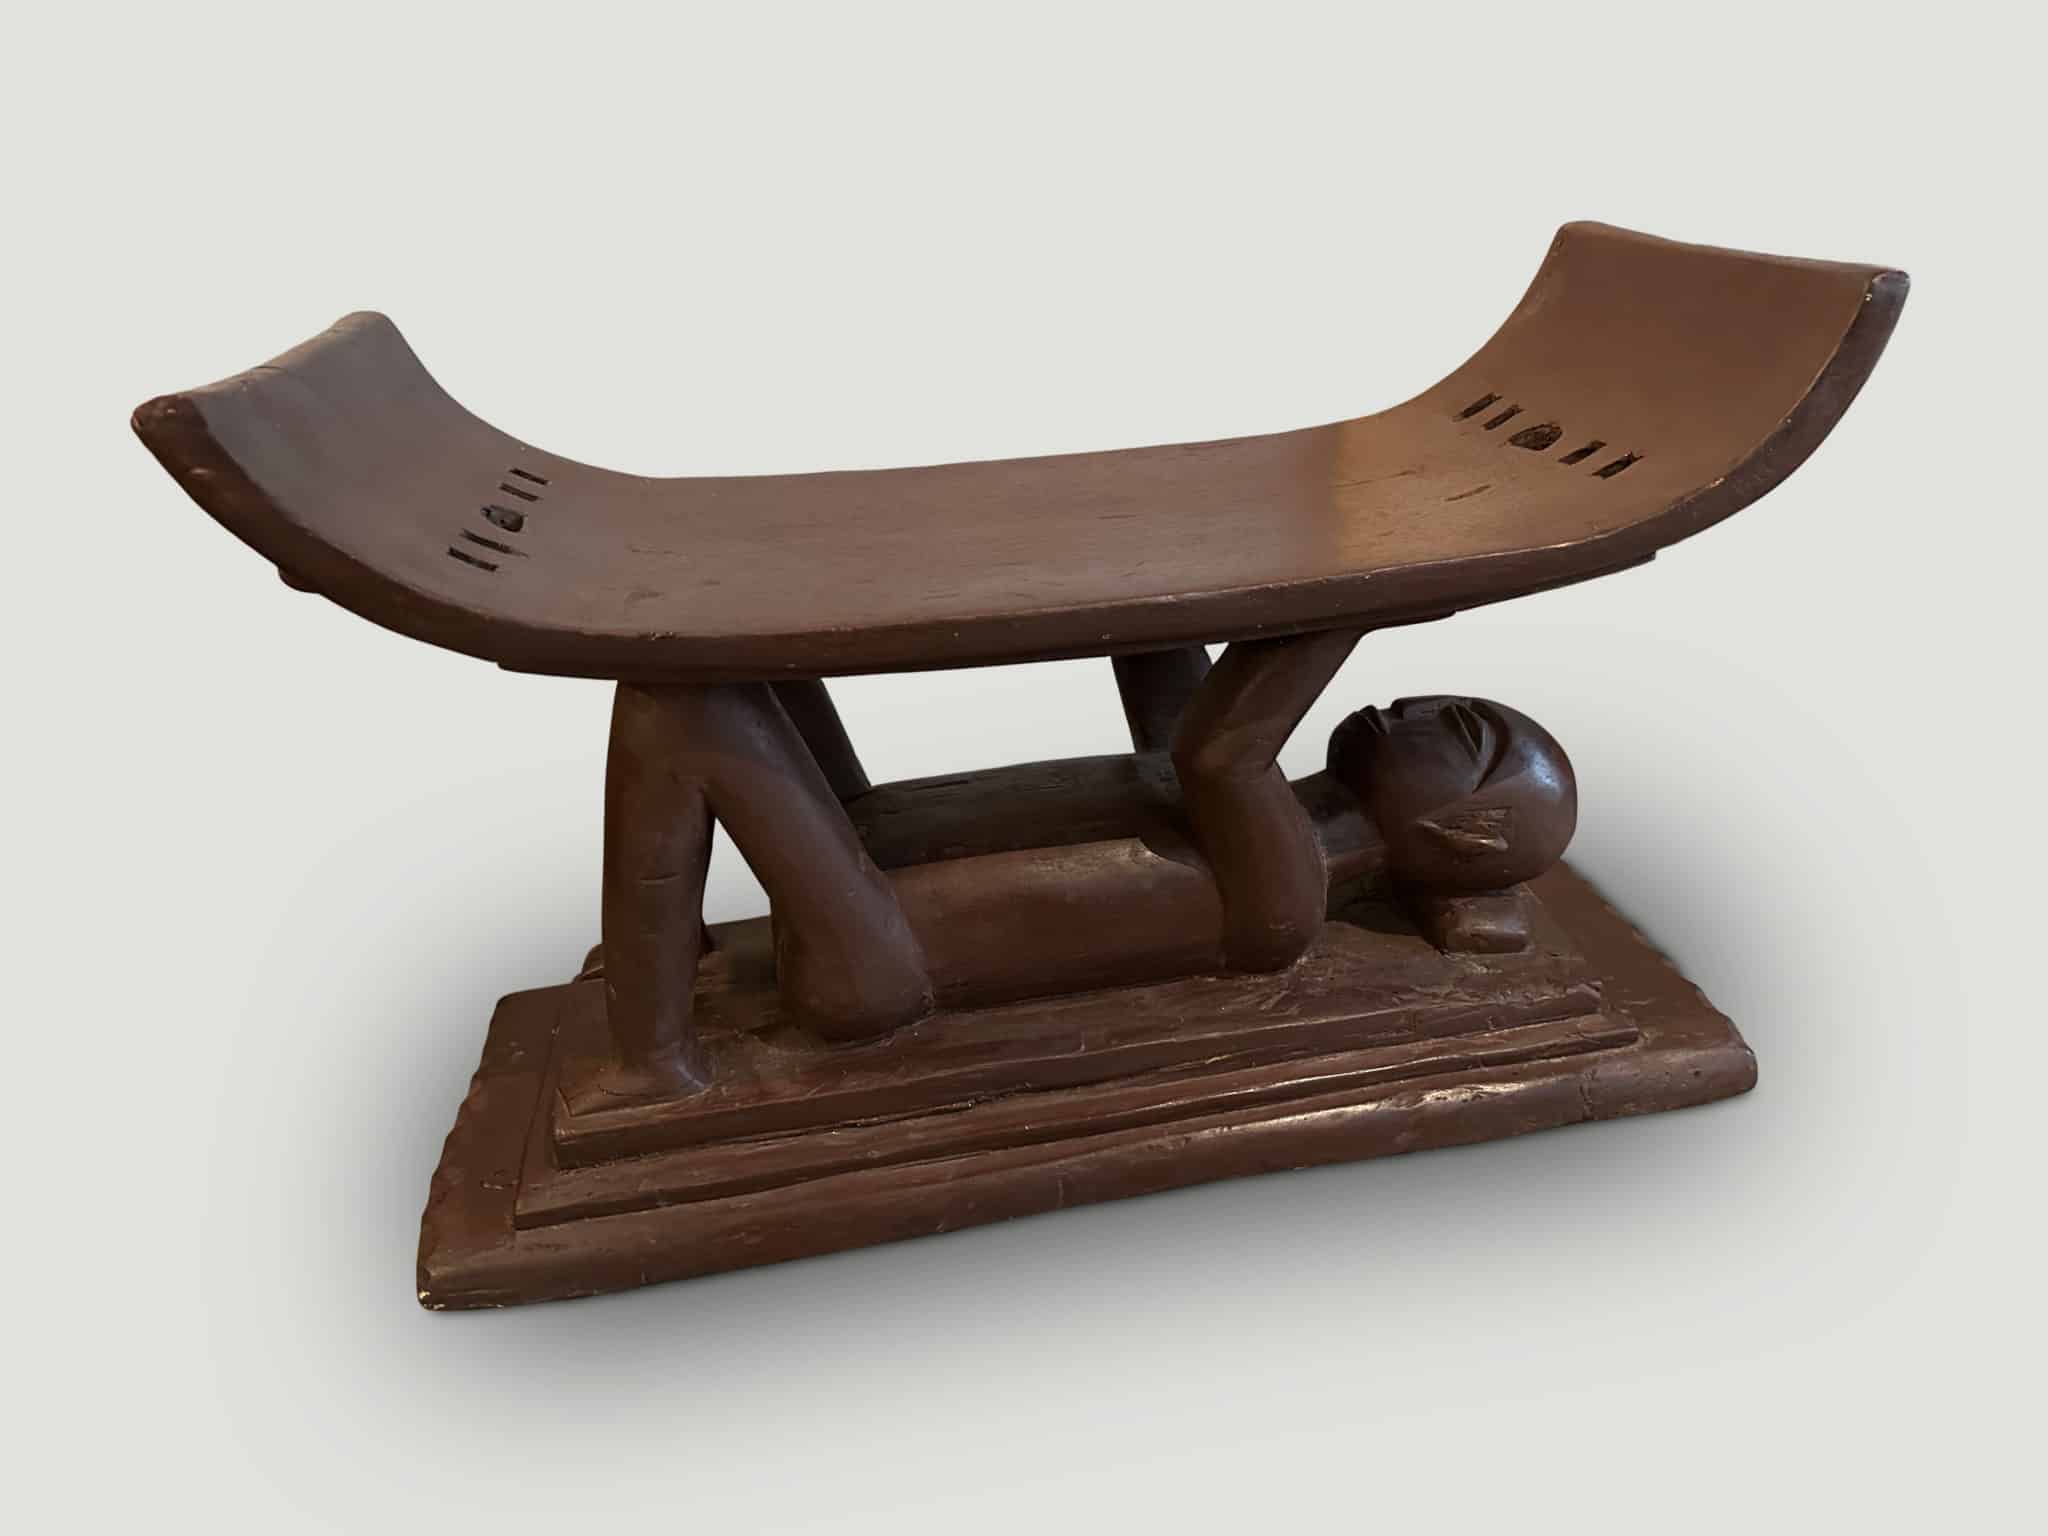 ANTIQUE ASHANTI STOOL WITH A HAND CARVED MONK